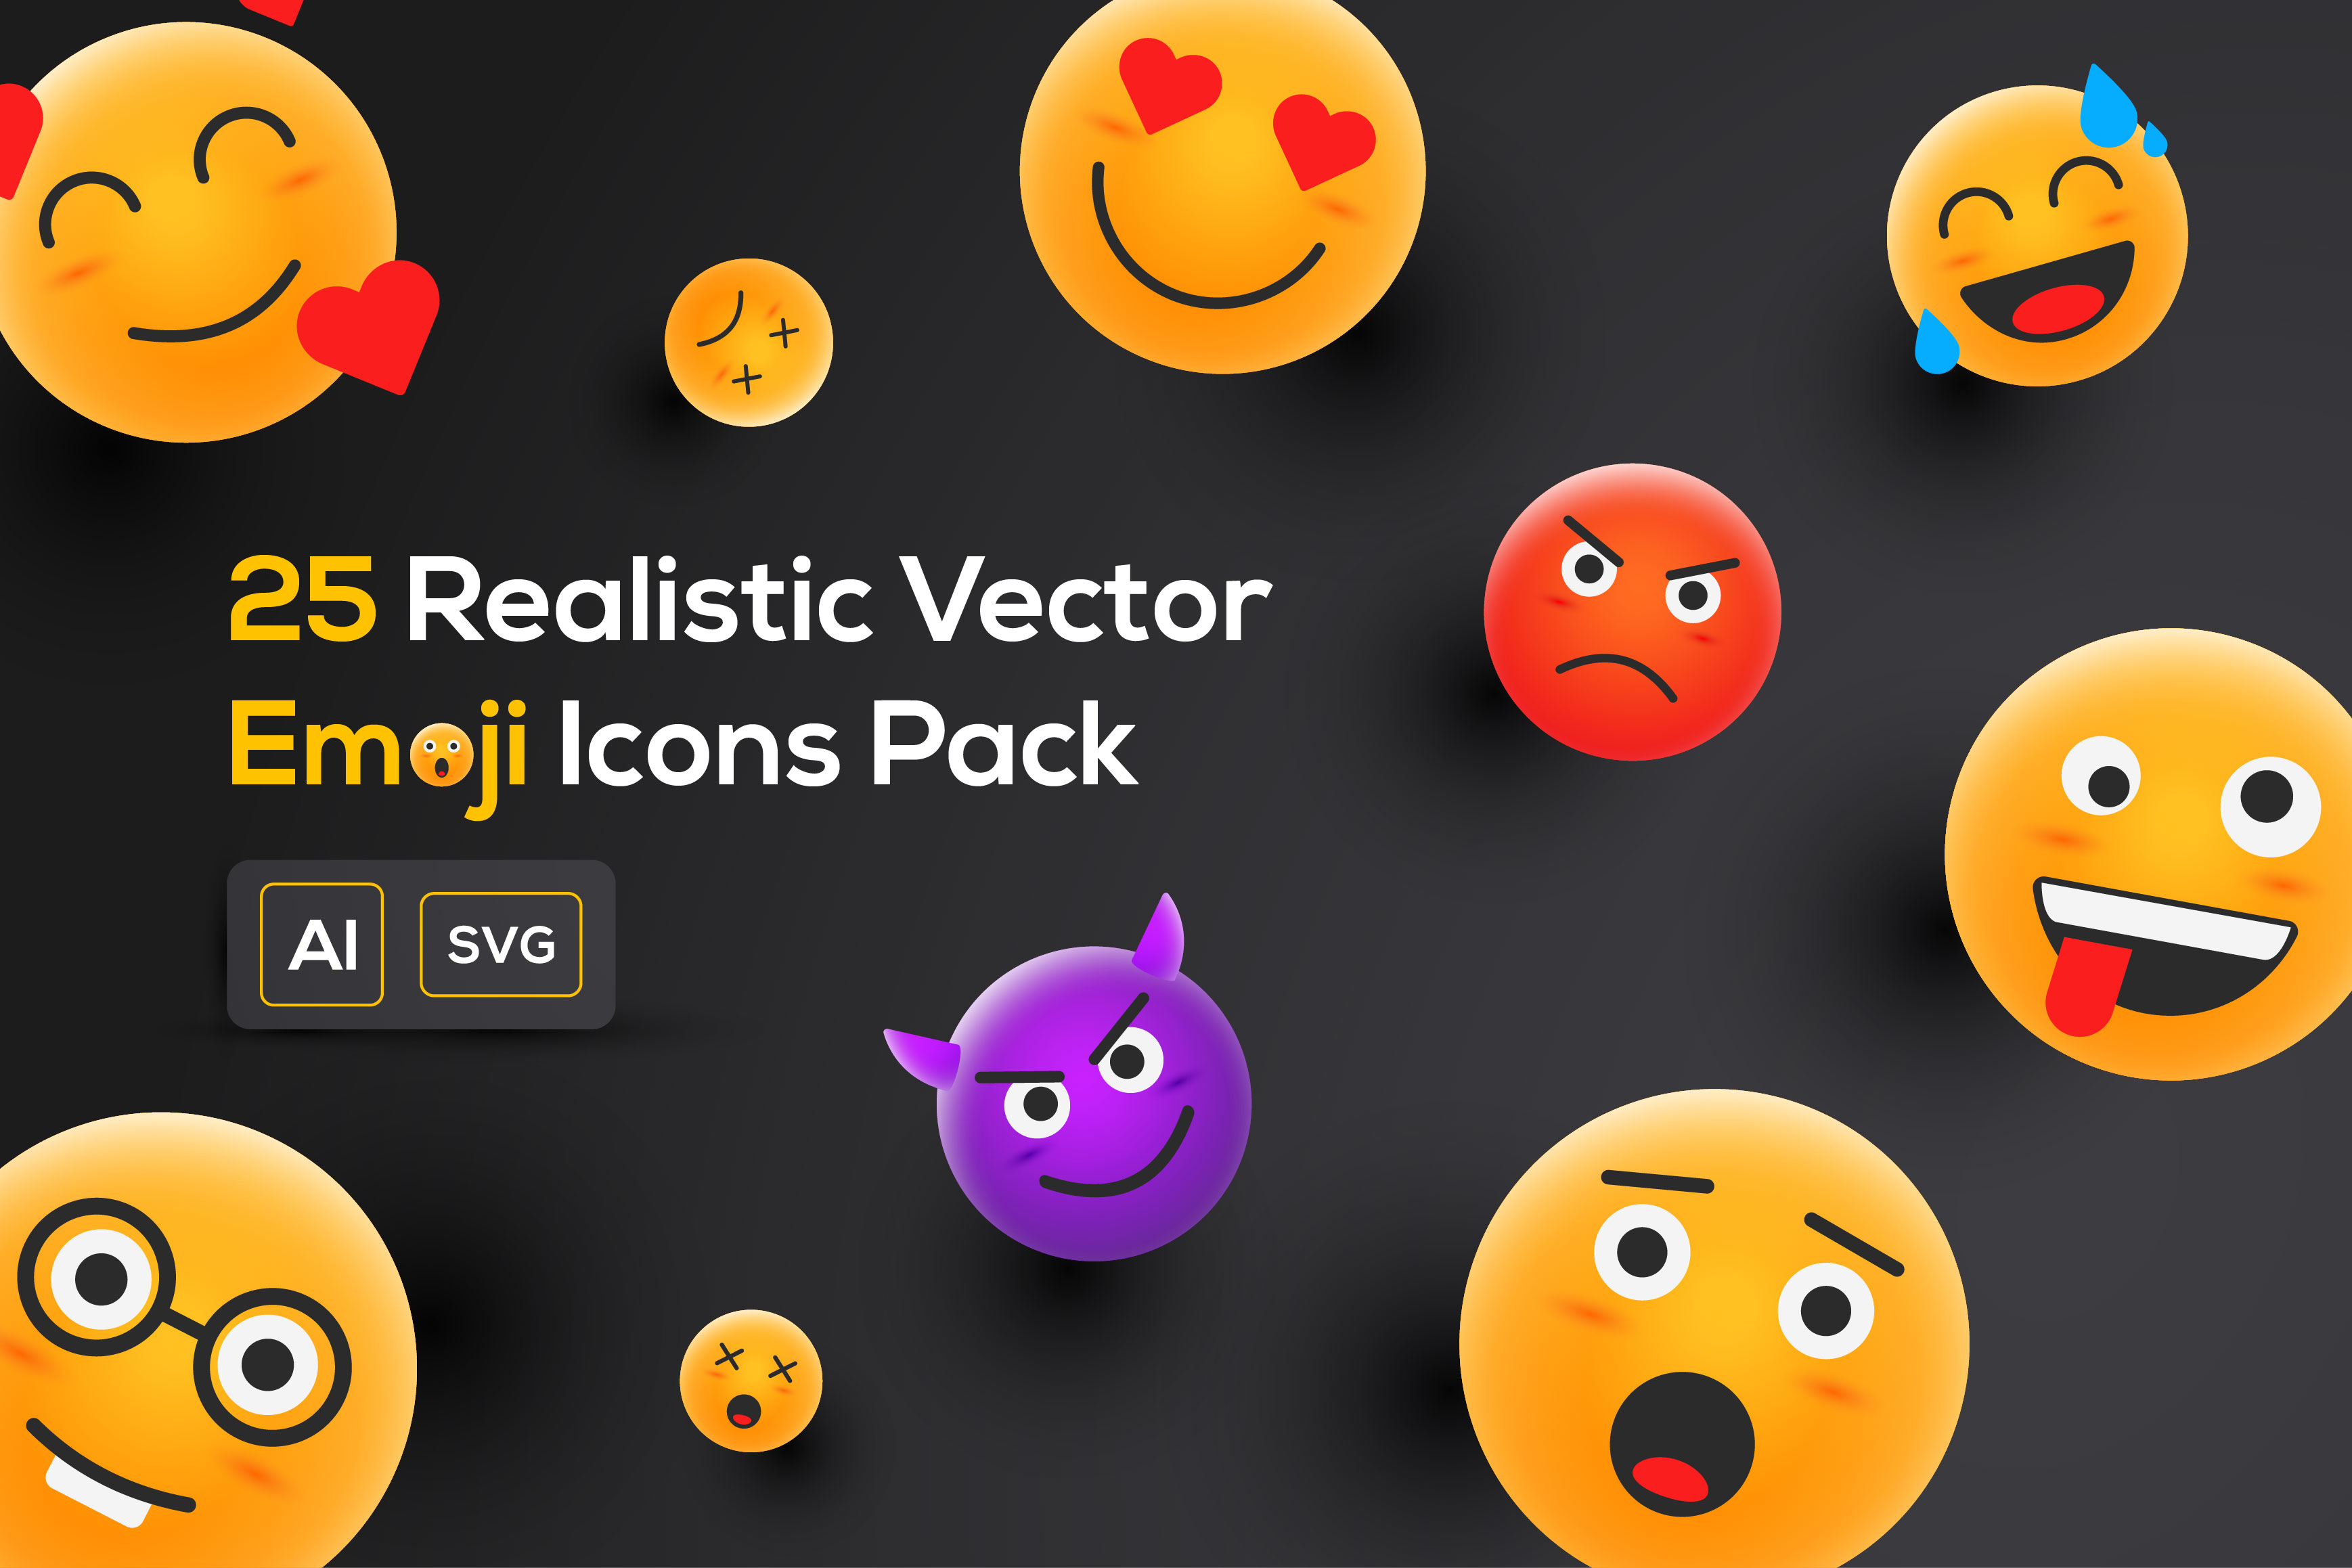 Smiley and people icon Yummy icon png download - 1404*1400 - Free